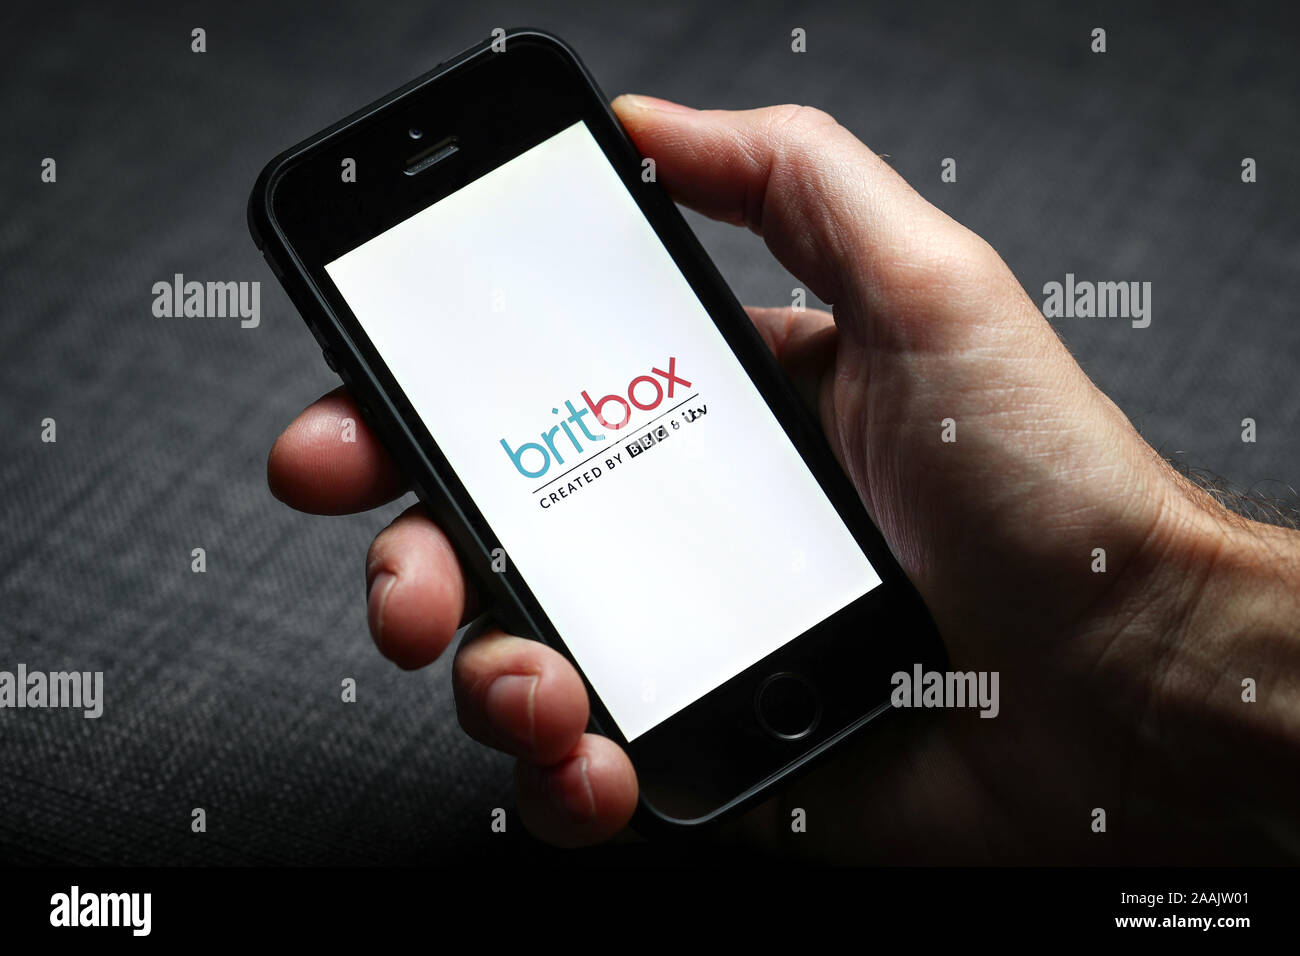 Britbox streaming service app by the BBC and ITV on a mobile phone Stock Photo